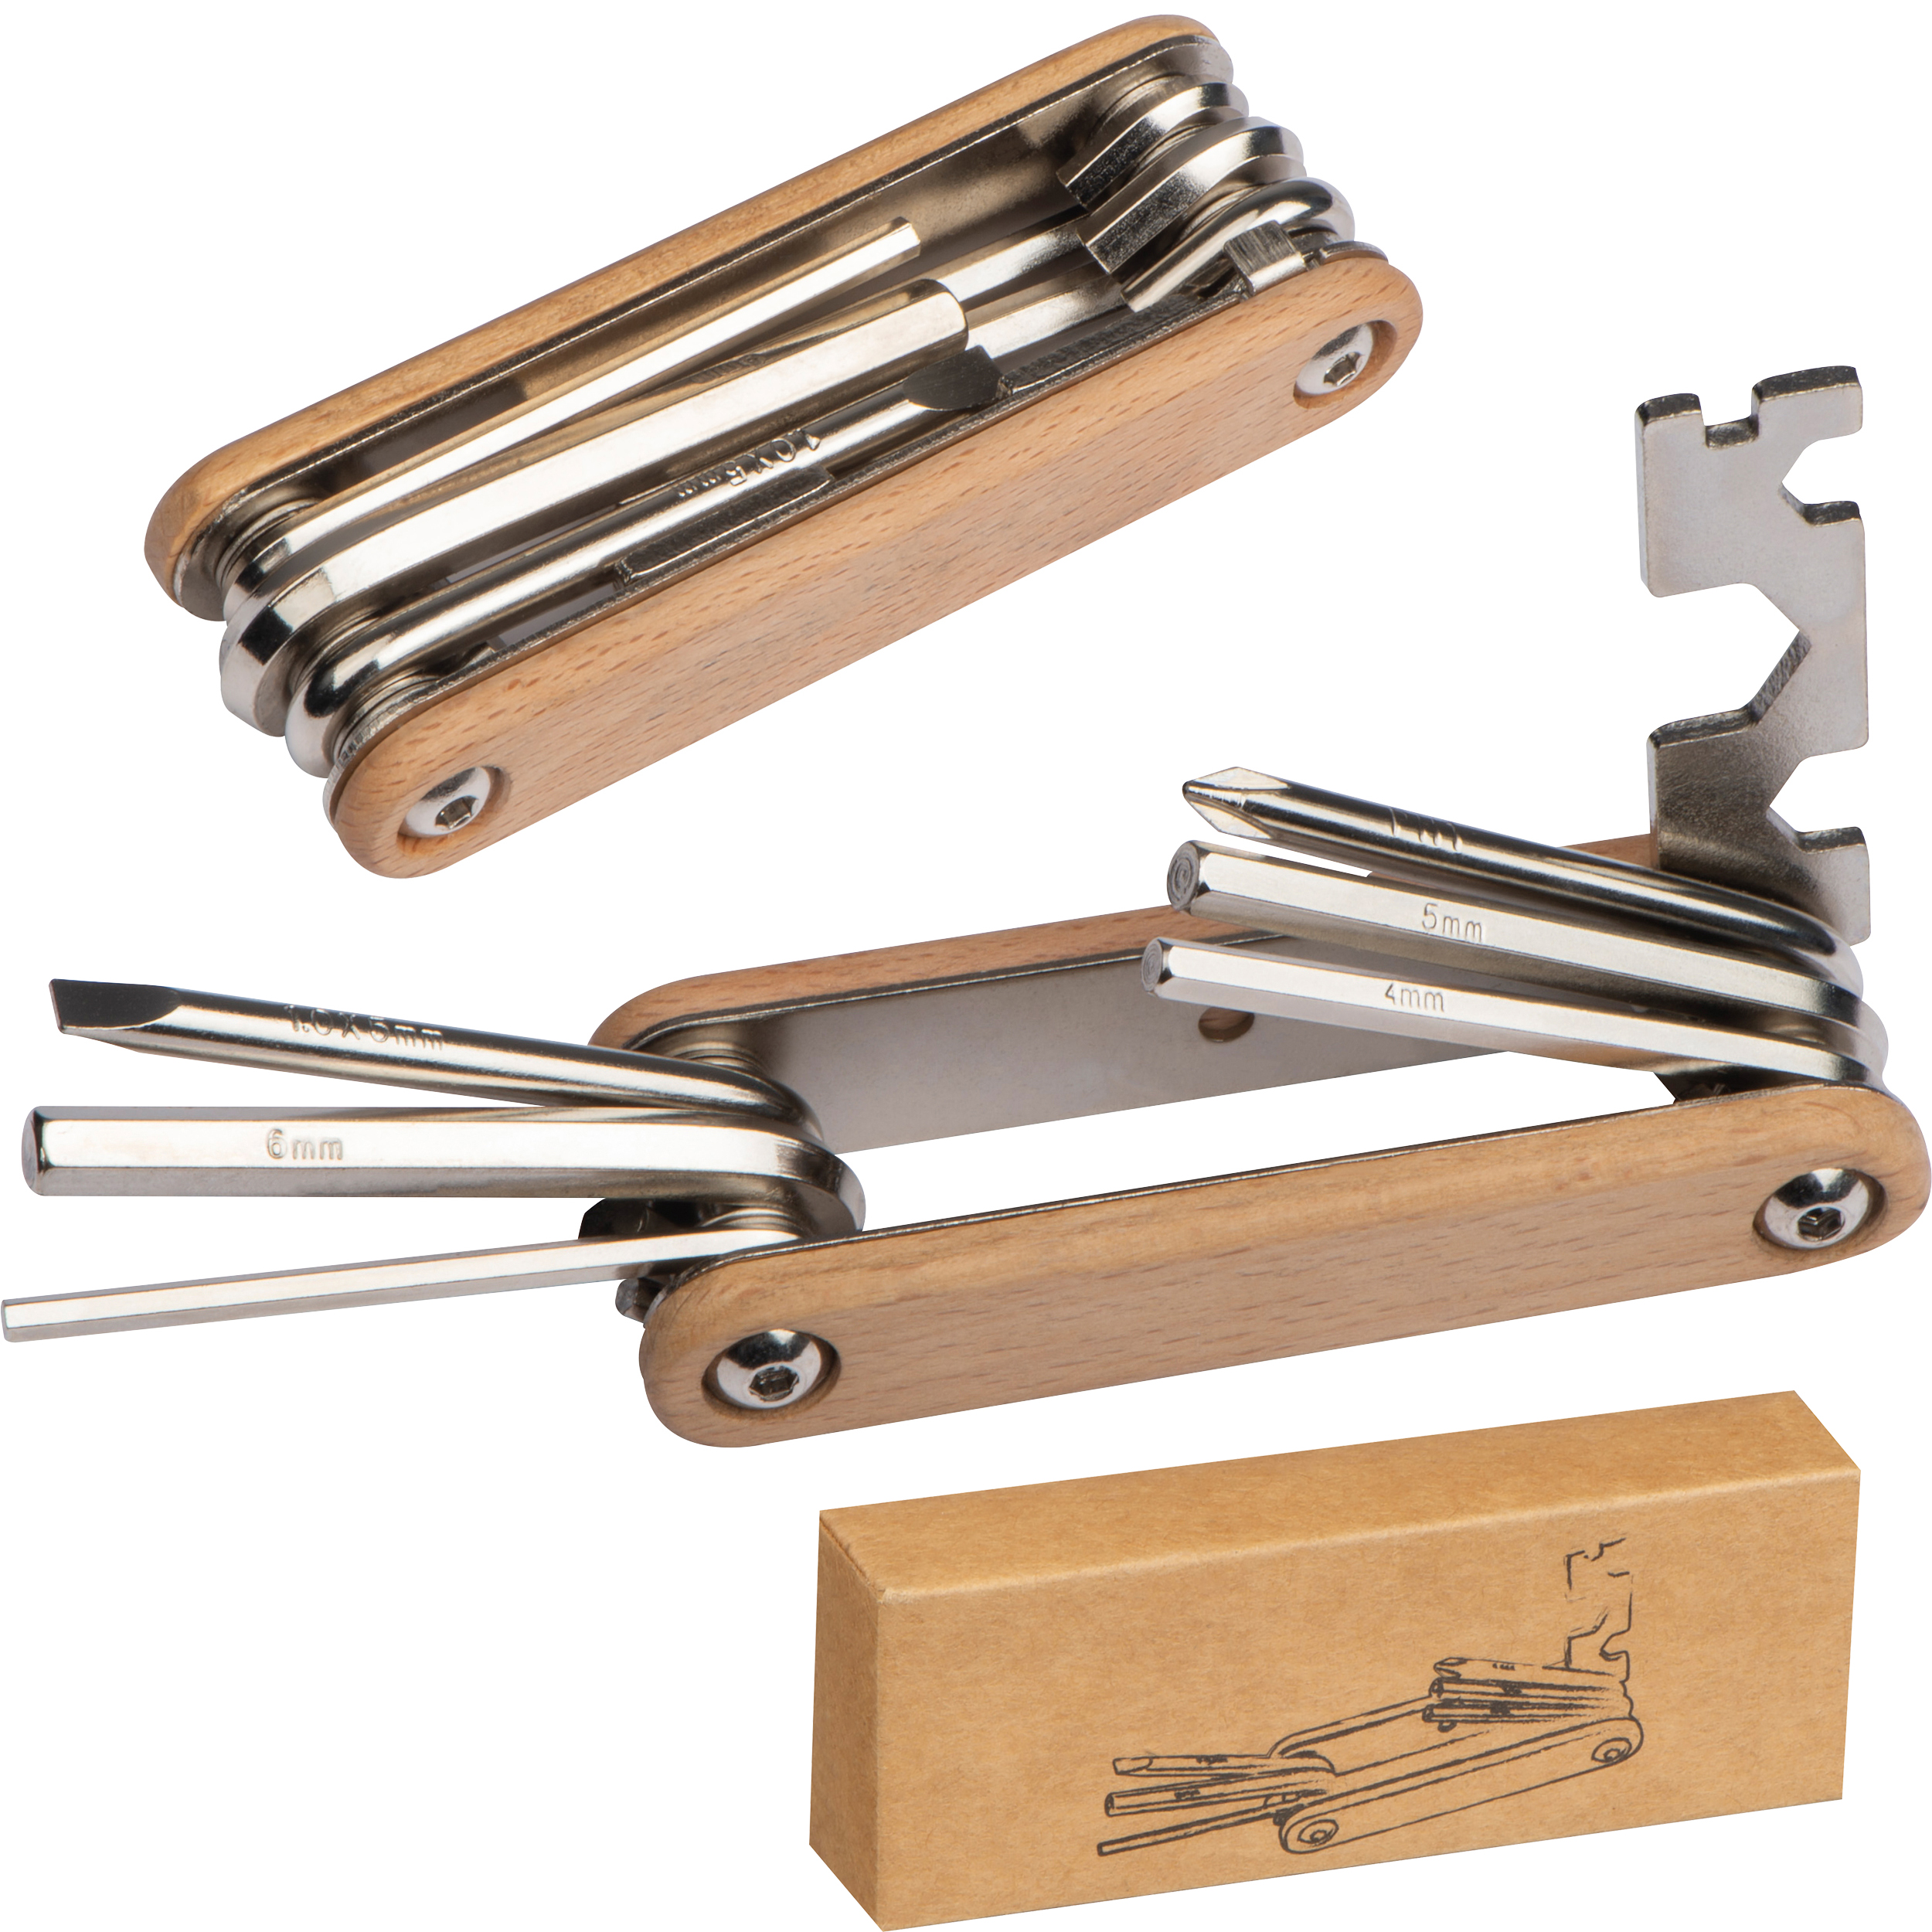 A wooden multi-tool for bikes - Little Witley - Netheravon